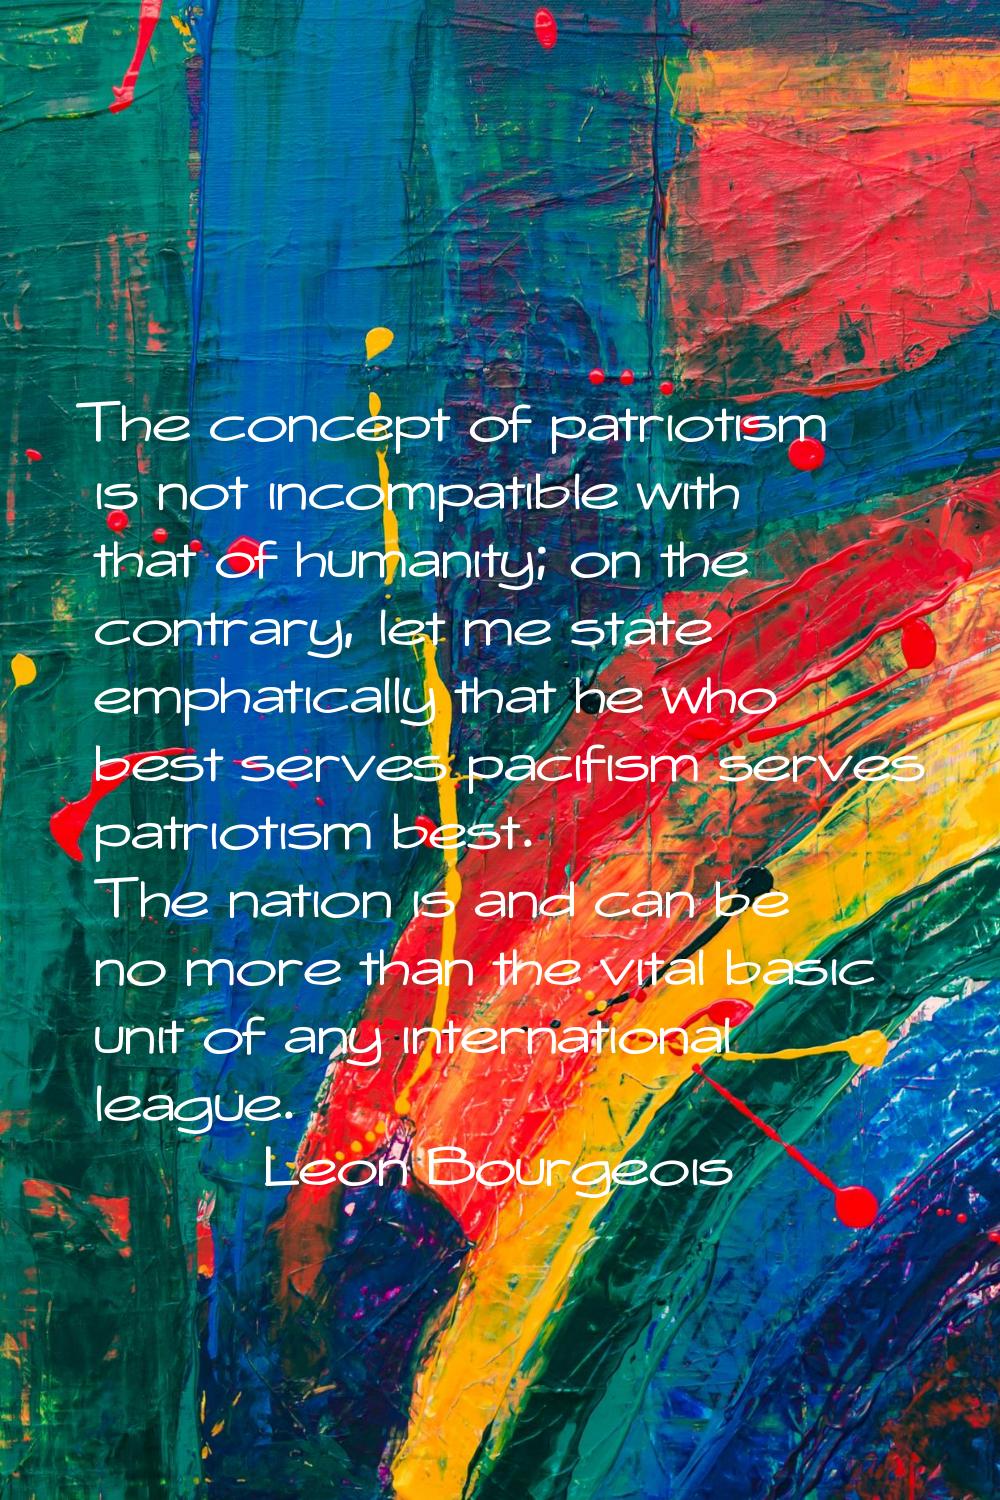 The concept of patriotism is not incompatible with that of humanity; on the contrary, let me state 